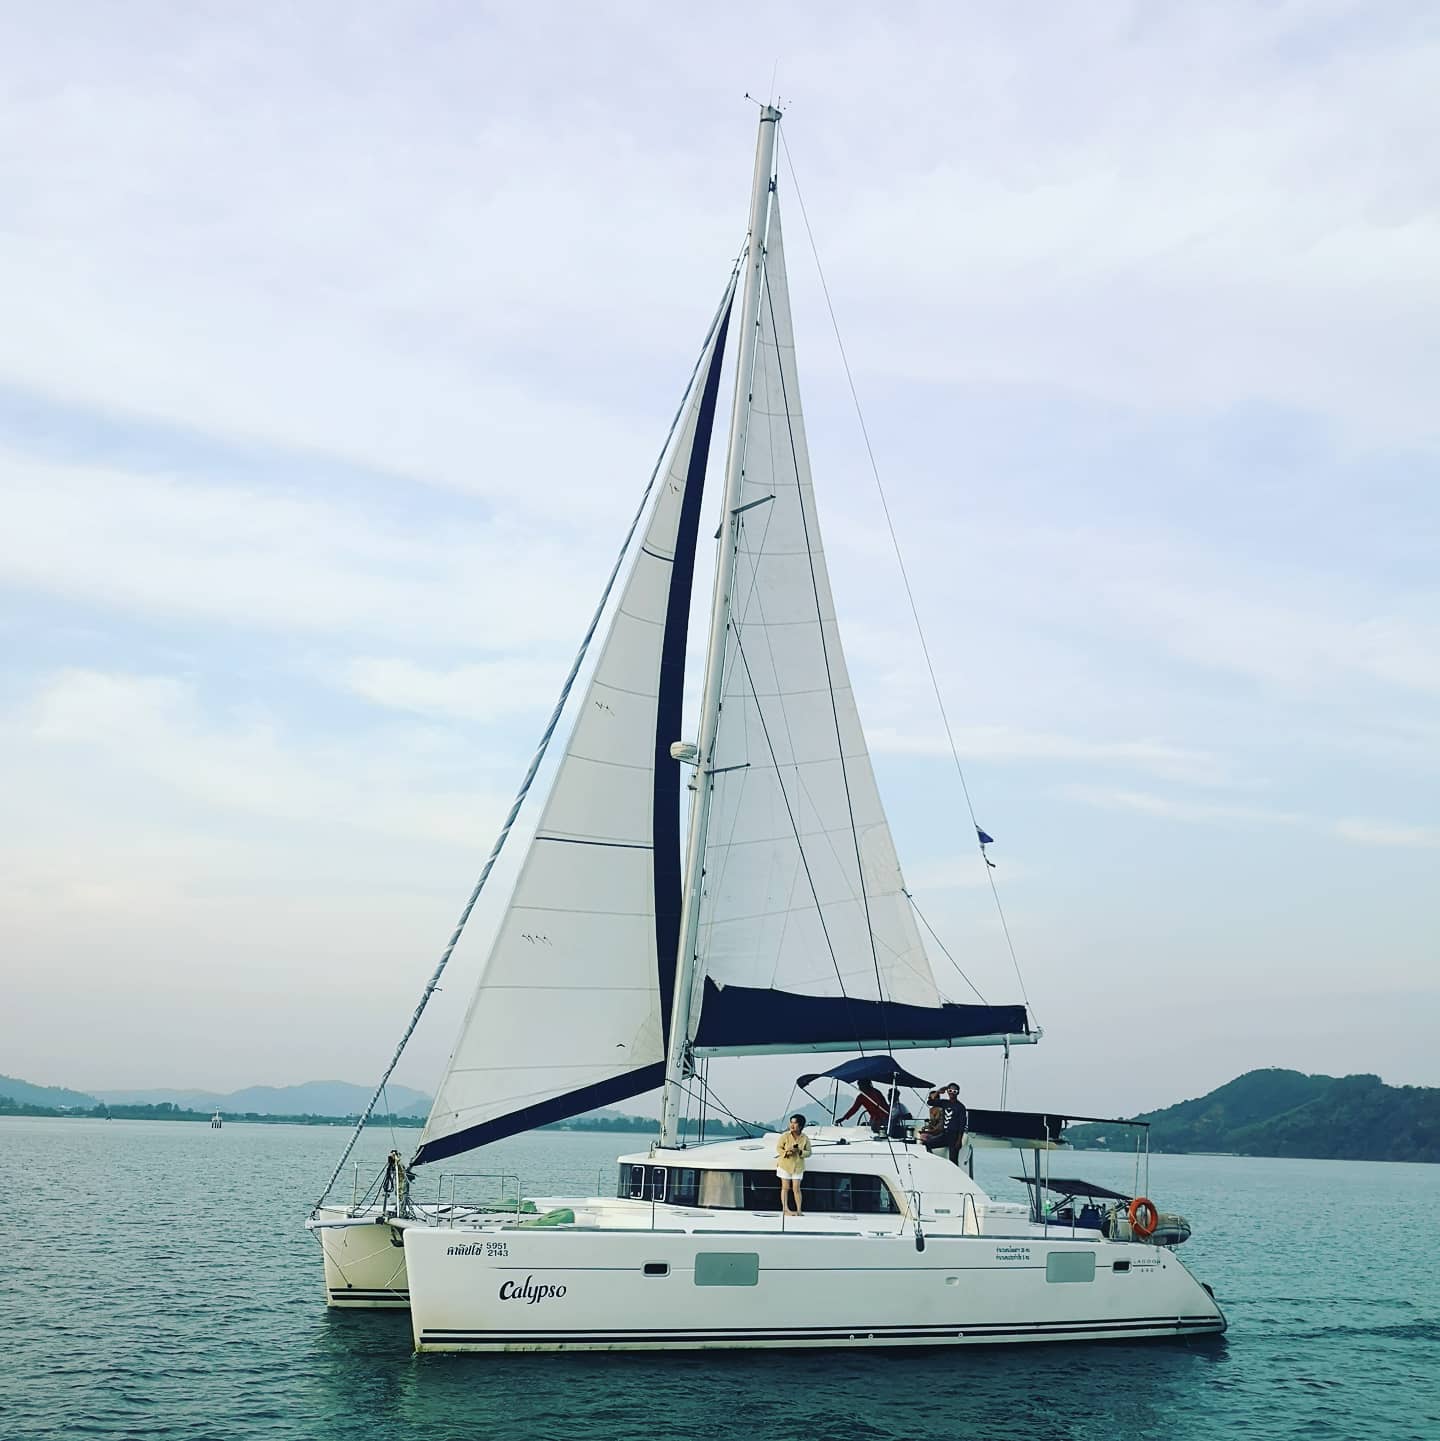 Phuket Boat Charter catarman with some tourists